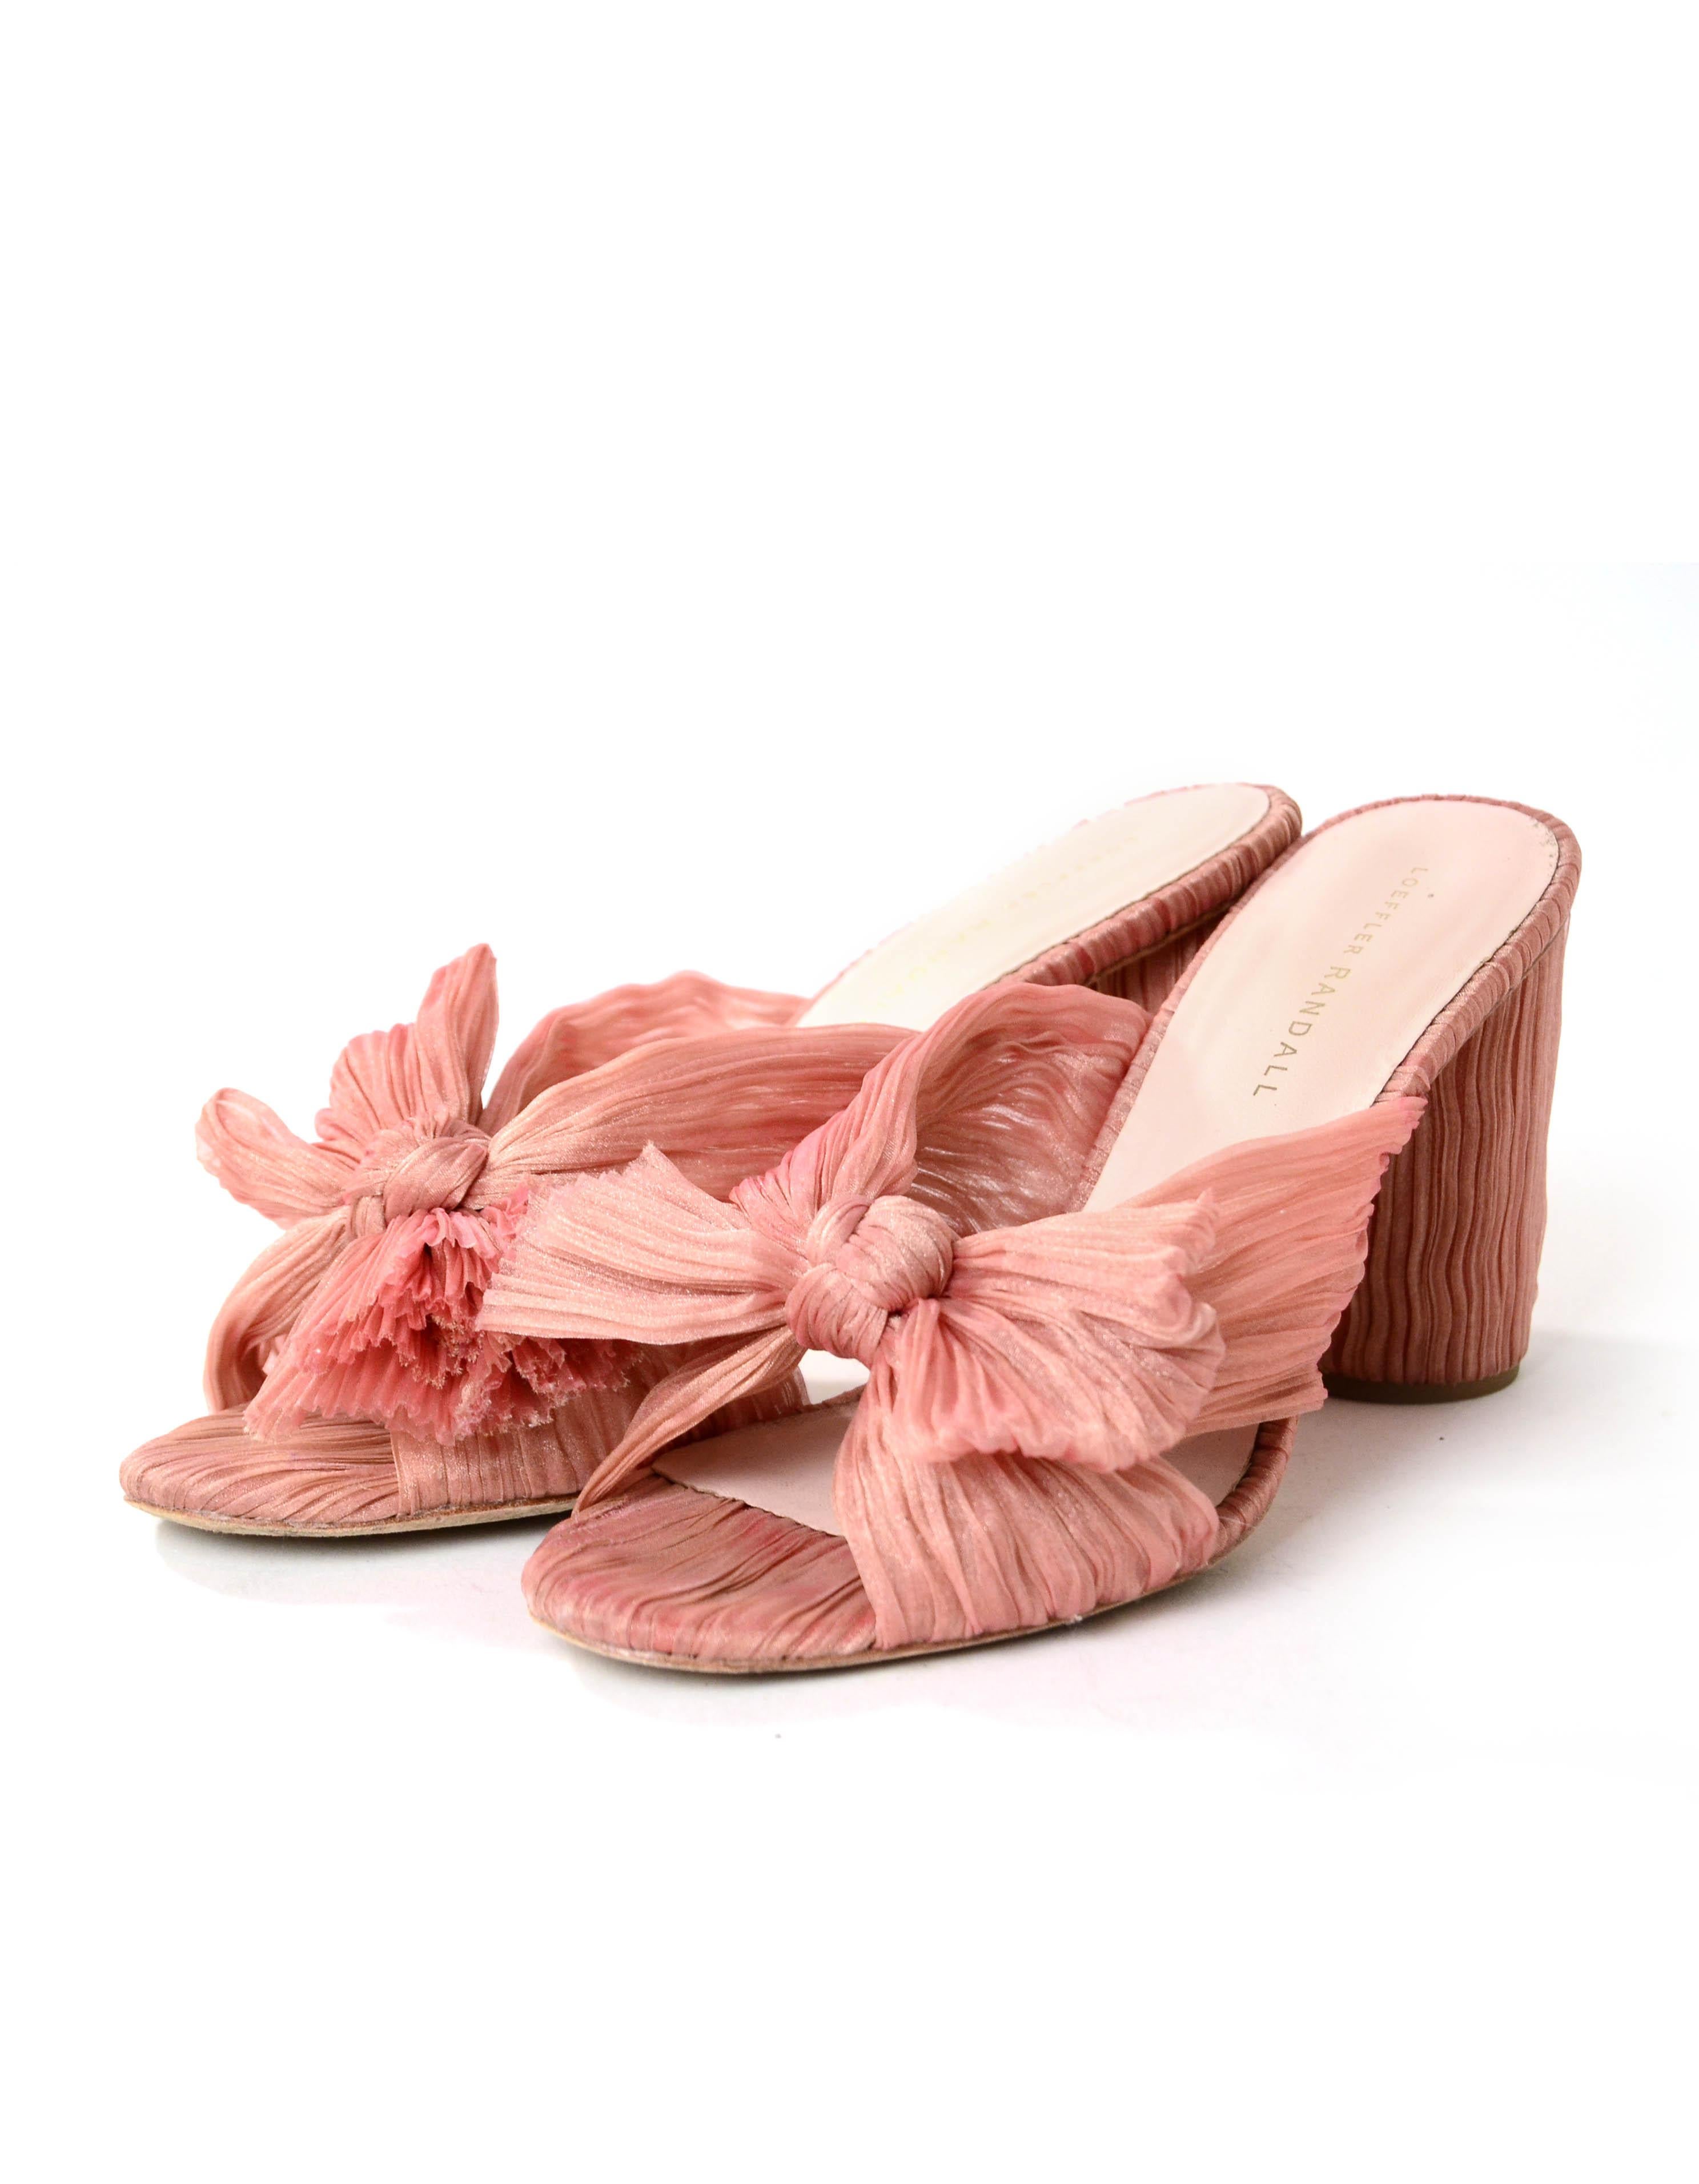 Loeffler Randall Penny Knotted Metallic Mules

Made In: China
Color: blush/rose gold
Materials: Metallic
Closure/Opening: Slip on
Overall Condition: Excellent - wear to soles

Estimated Retail: $395.00
Marked Size: 9.5
Heel Height: 3.5”